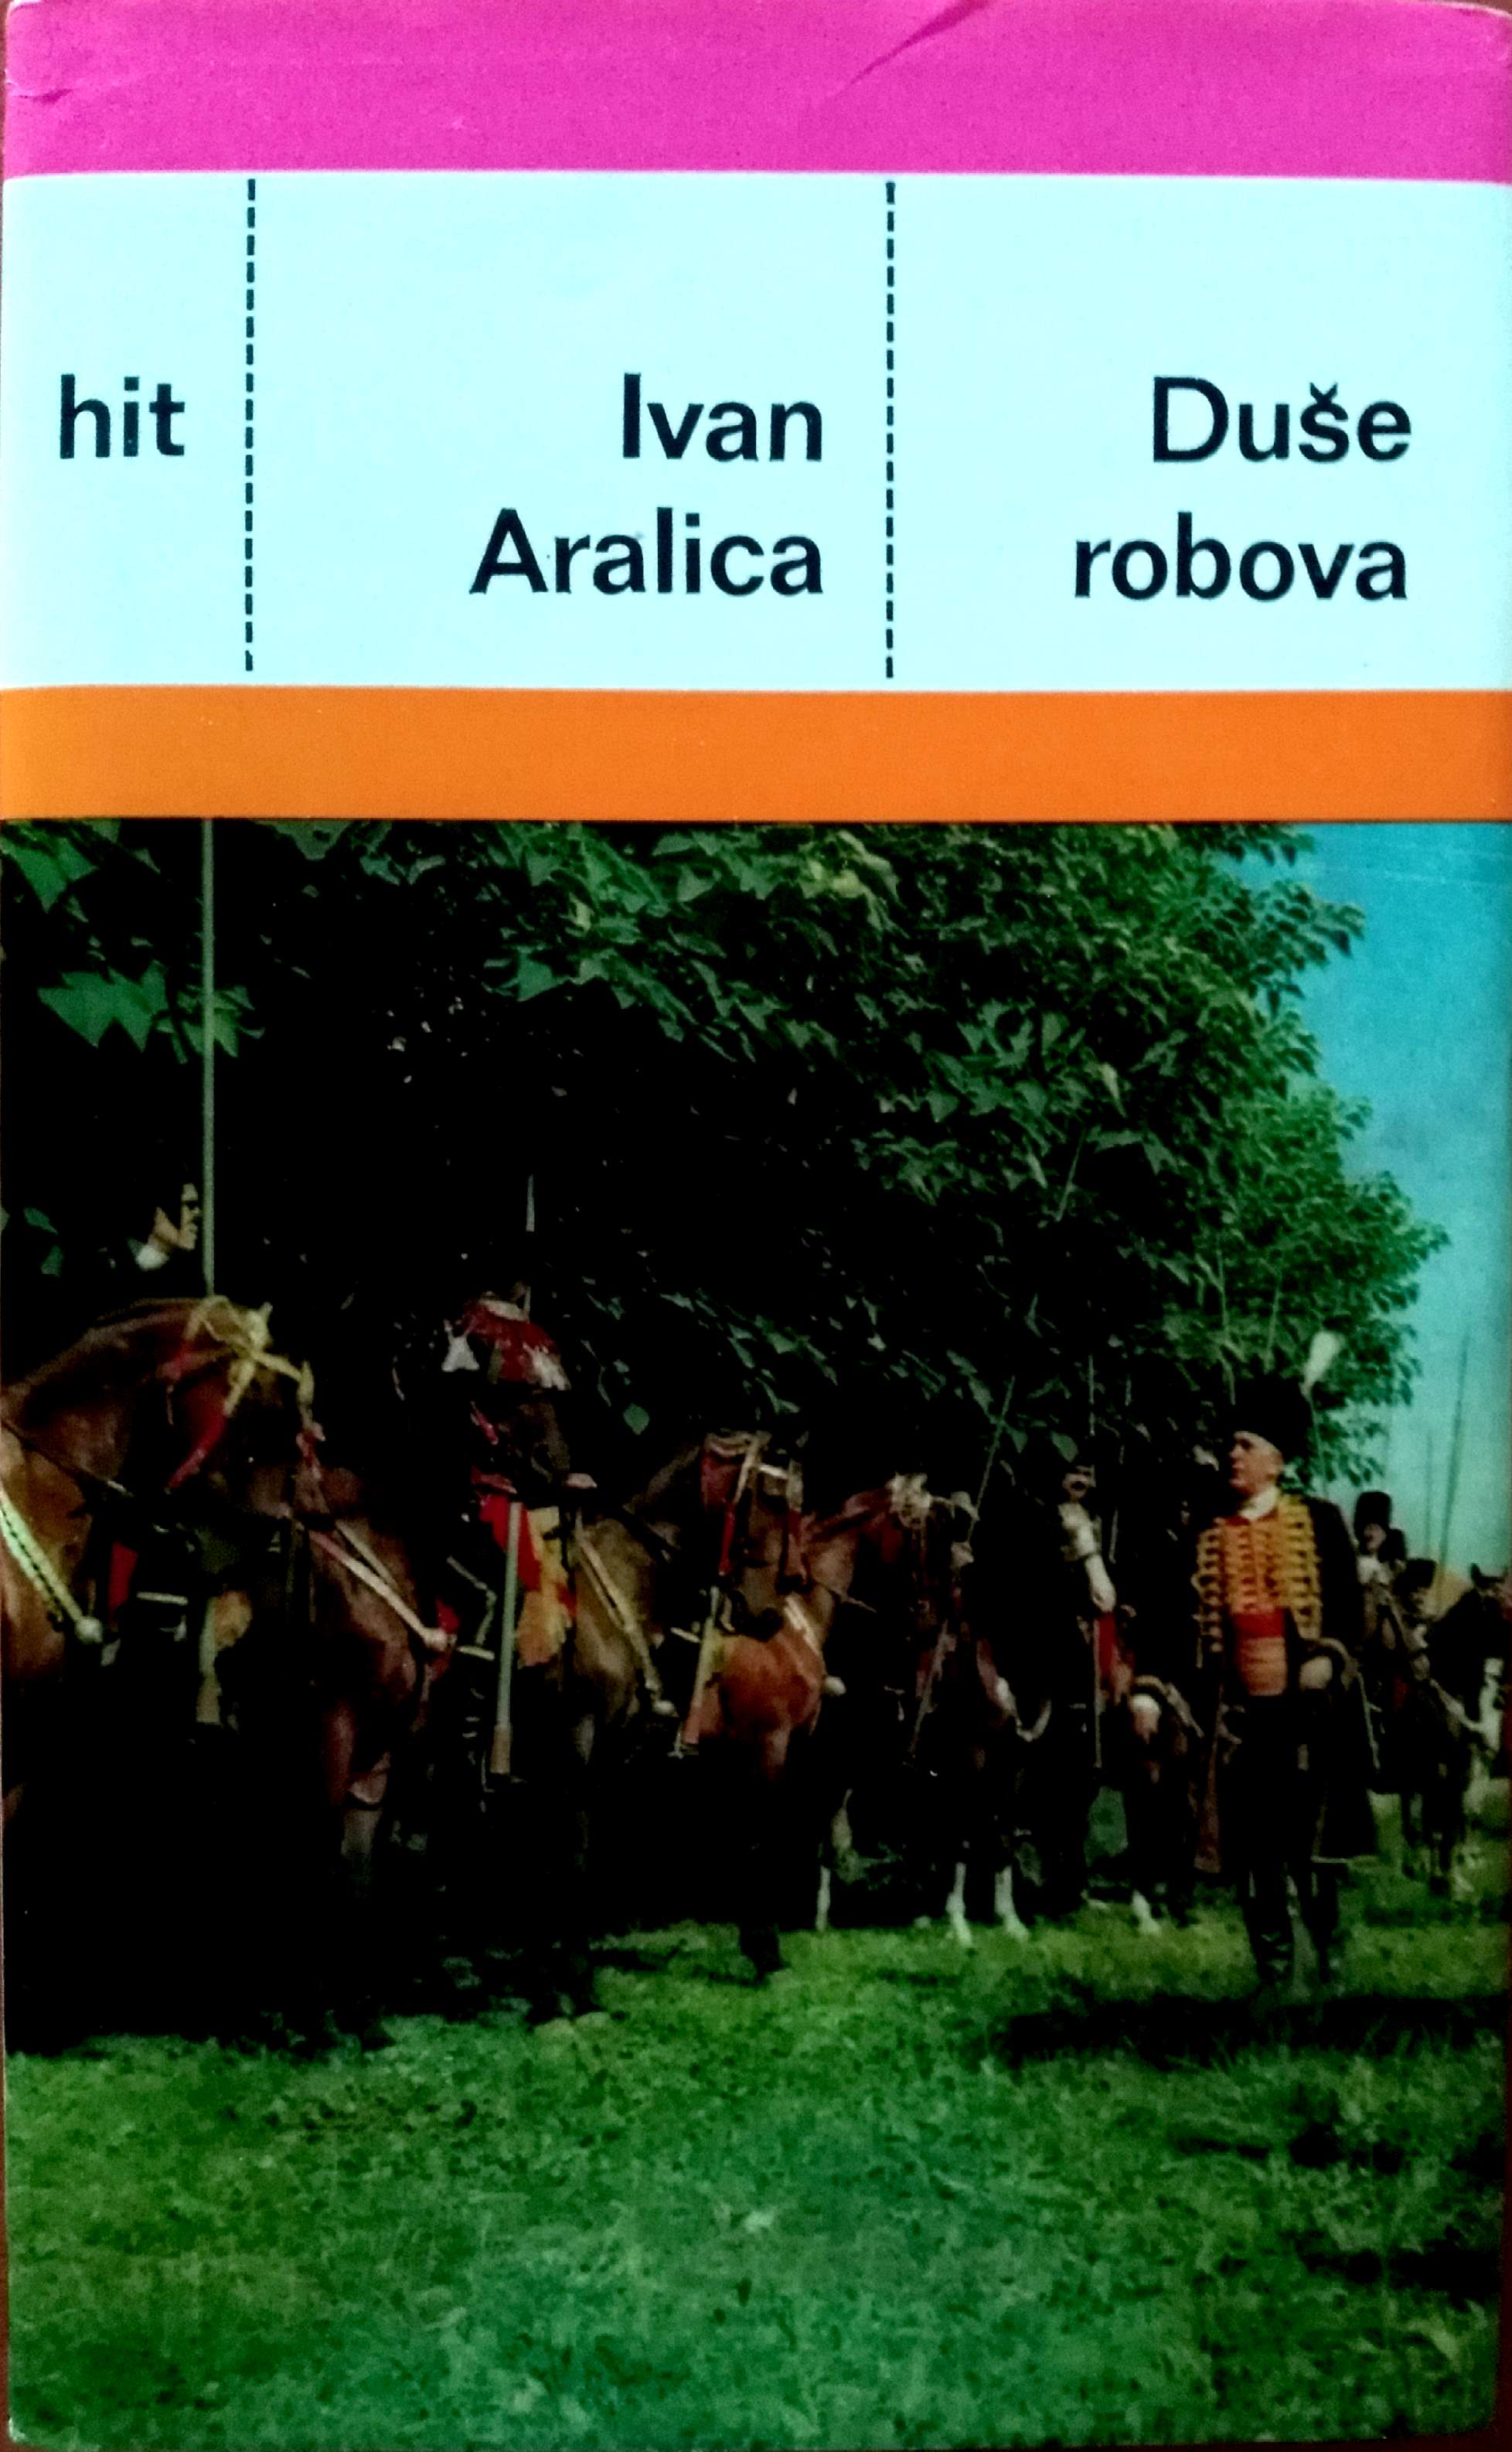 Cover of the novel Duše robova (The Souls of Slaves) by Ivan Aralica, first published in the HIT series by the Znanje publishing company in 1984 (2017-06-25).